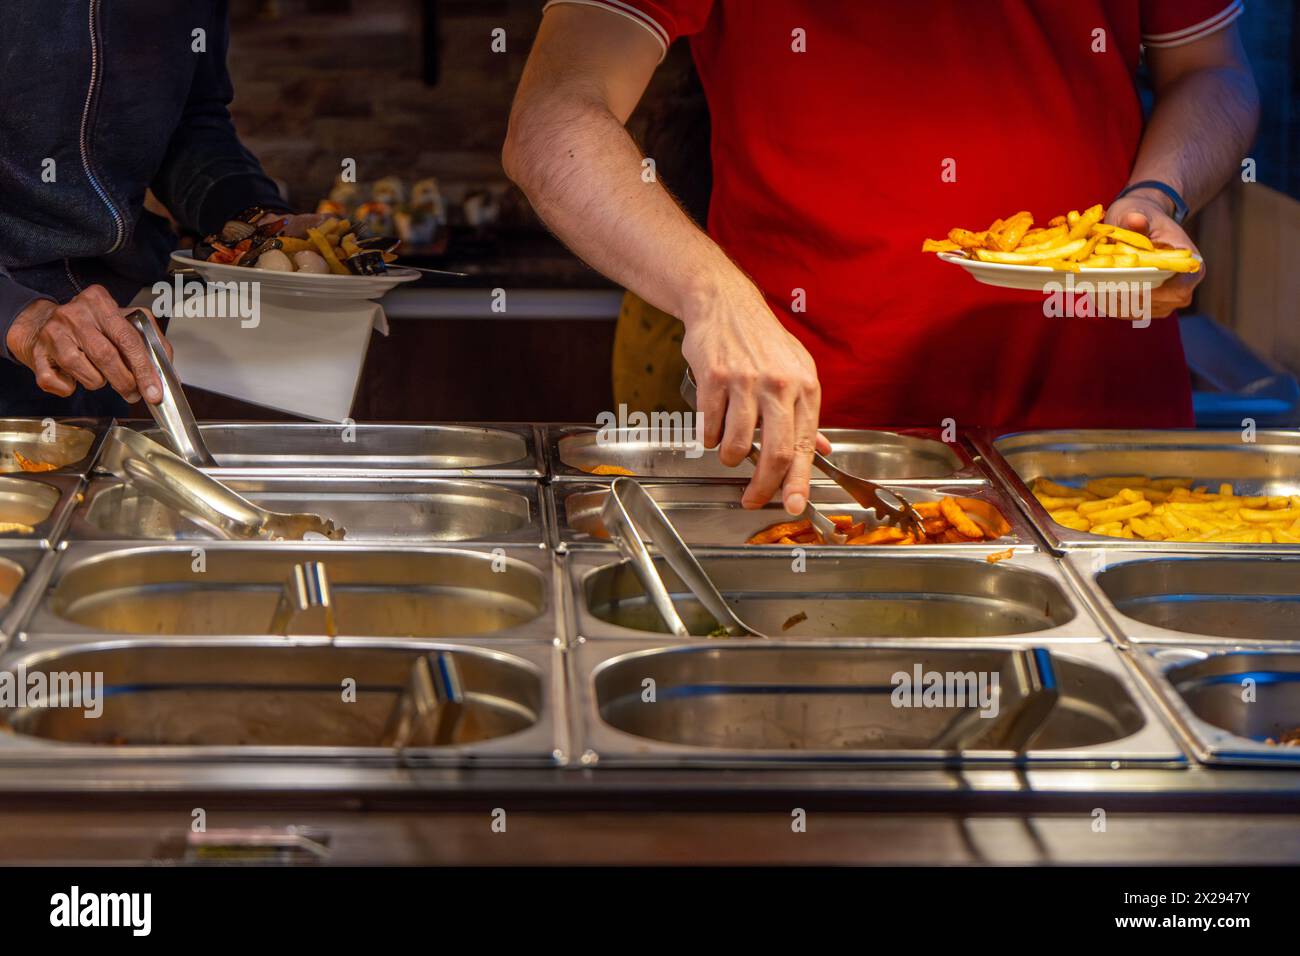 Two men help themselves to food and chips with tongs in their hands at a table with food served in stainless steel buckets at a restaurant's food buff Stock Photo